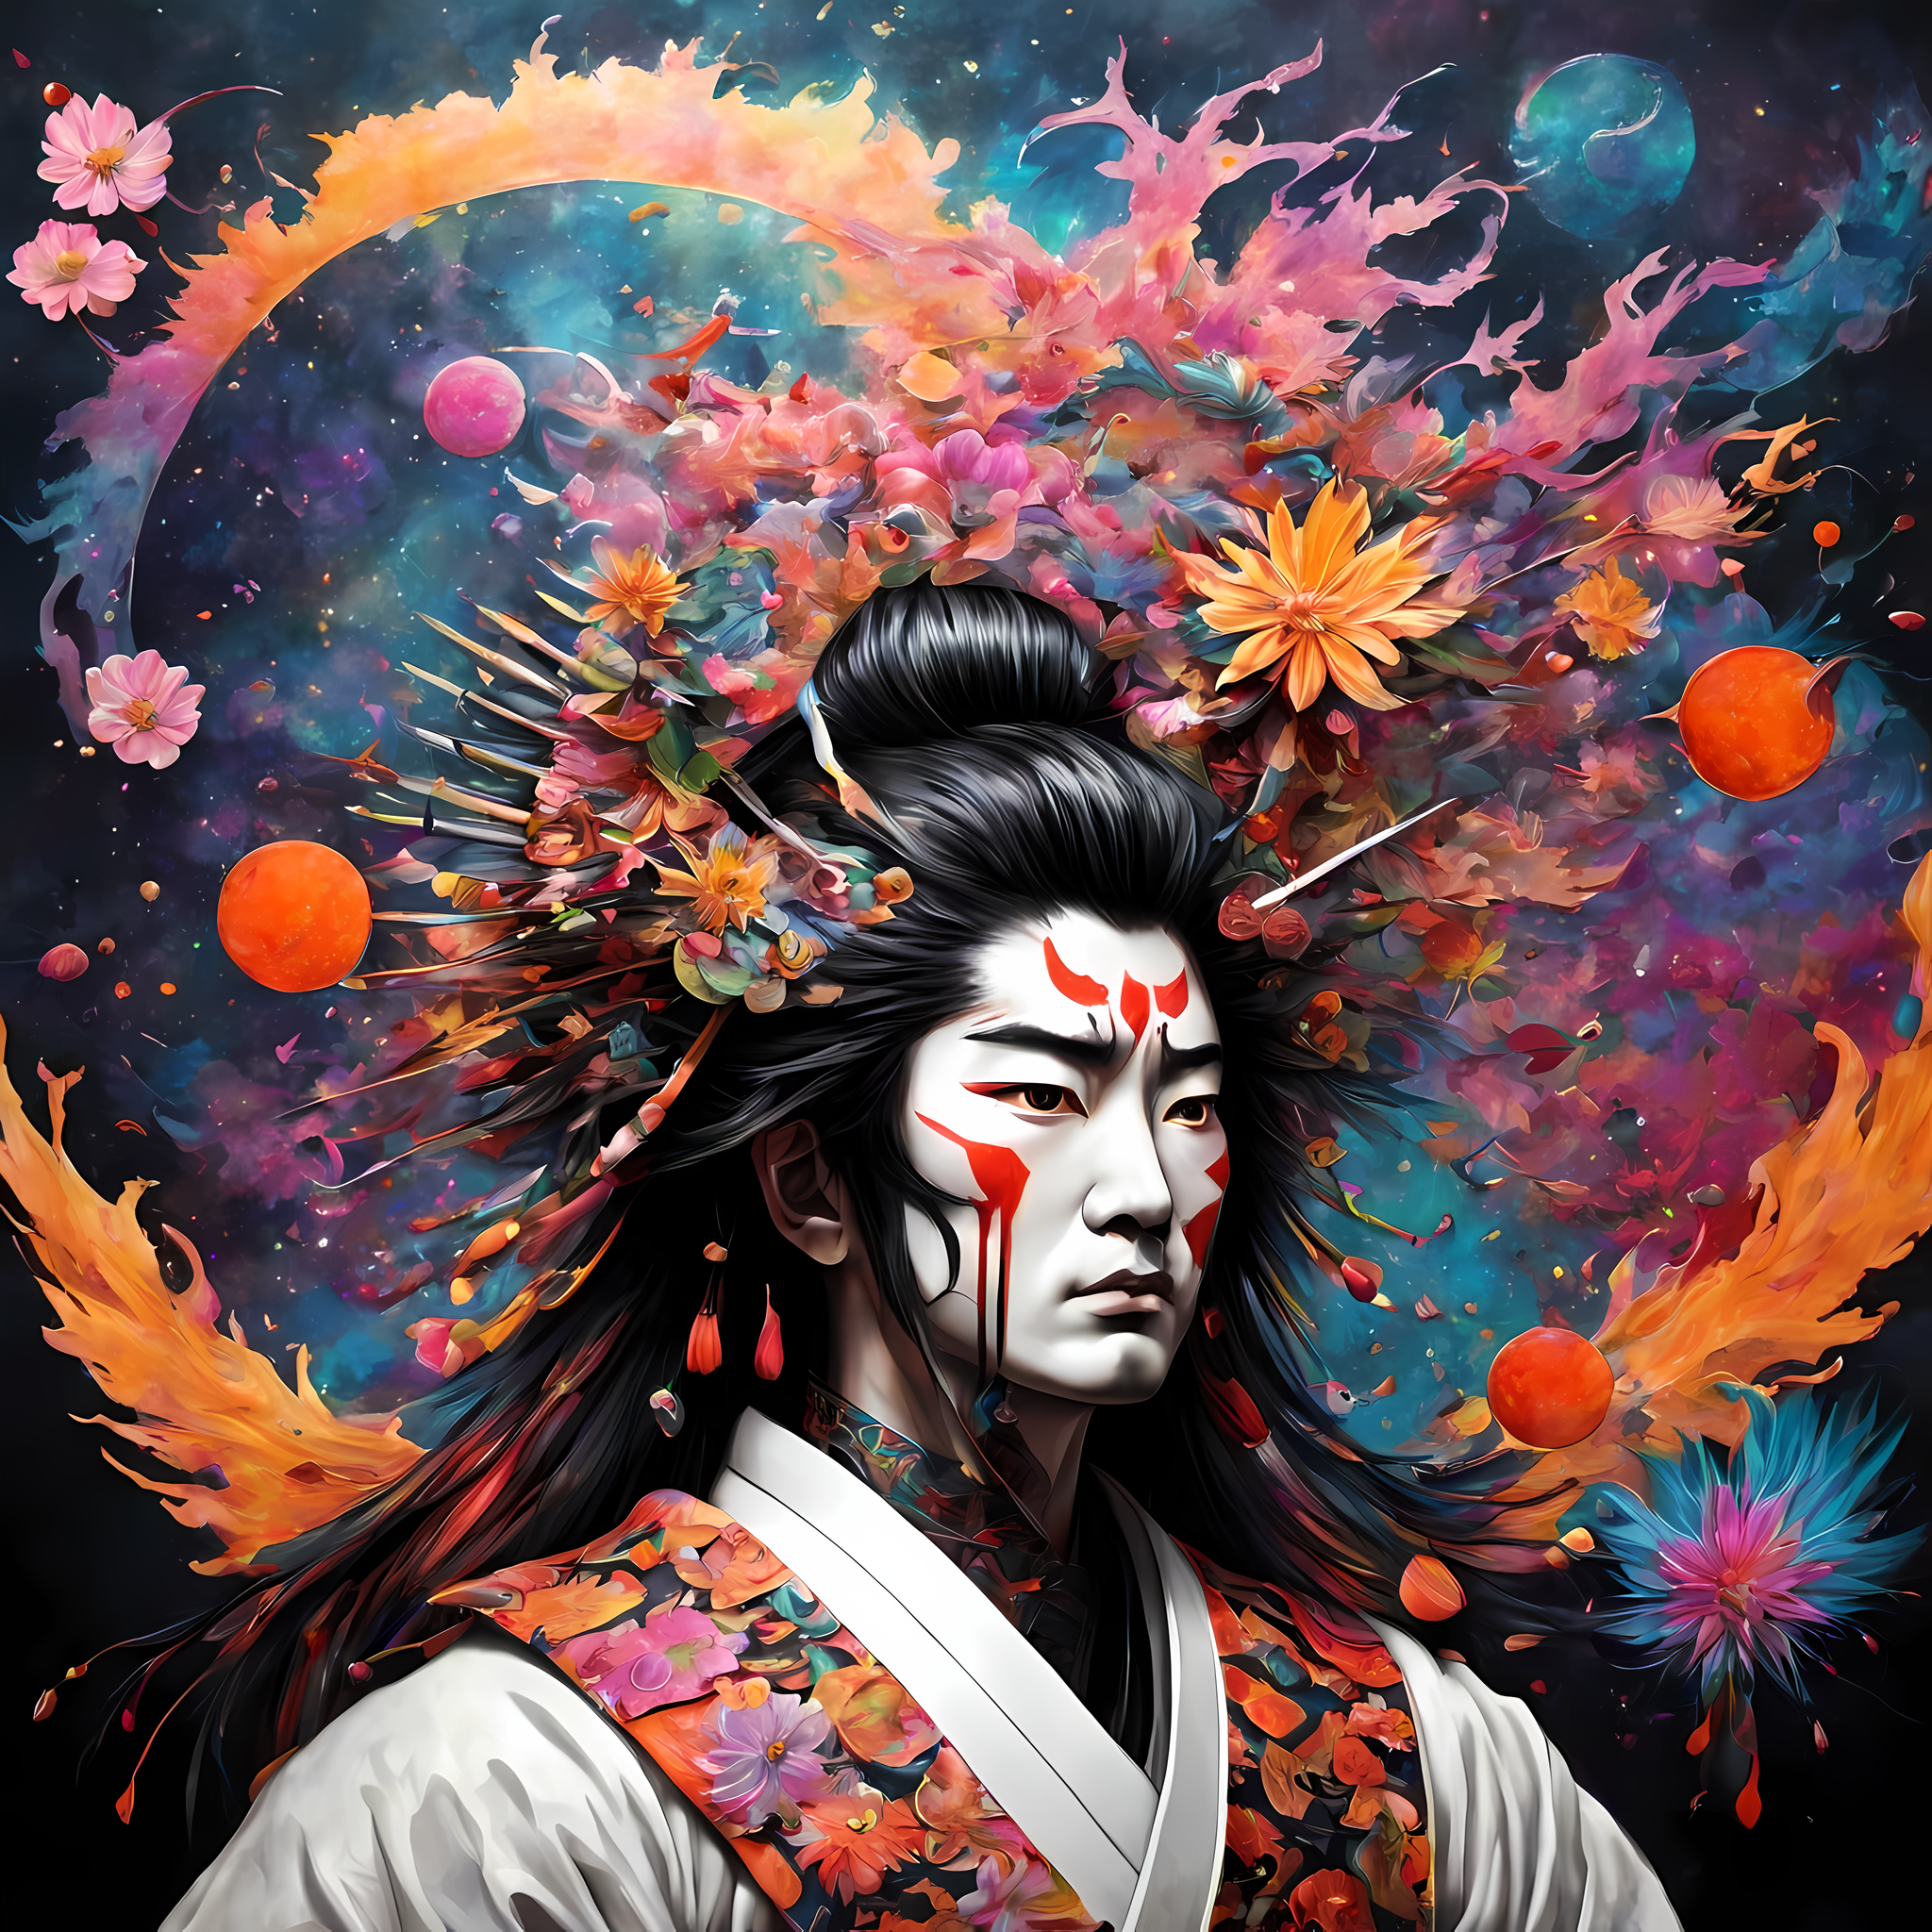 (((Whimsical Samurai Dreams))), a realy realistic and psychedelic work full of flashy and brilliant color. It's textured and twisted dust